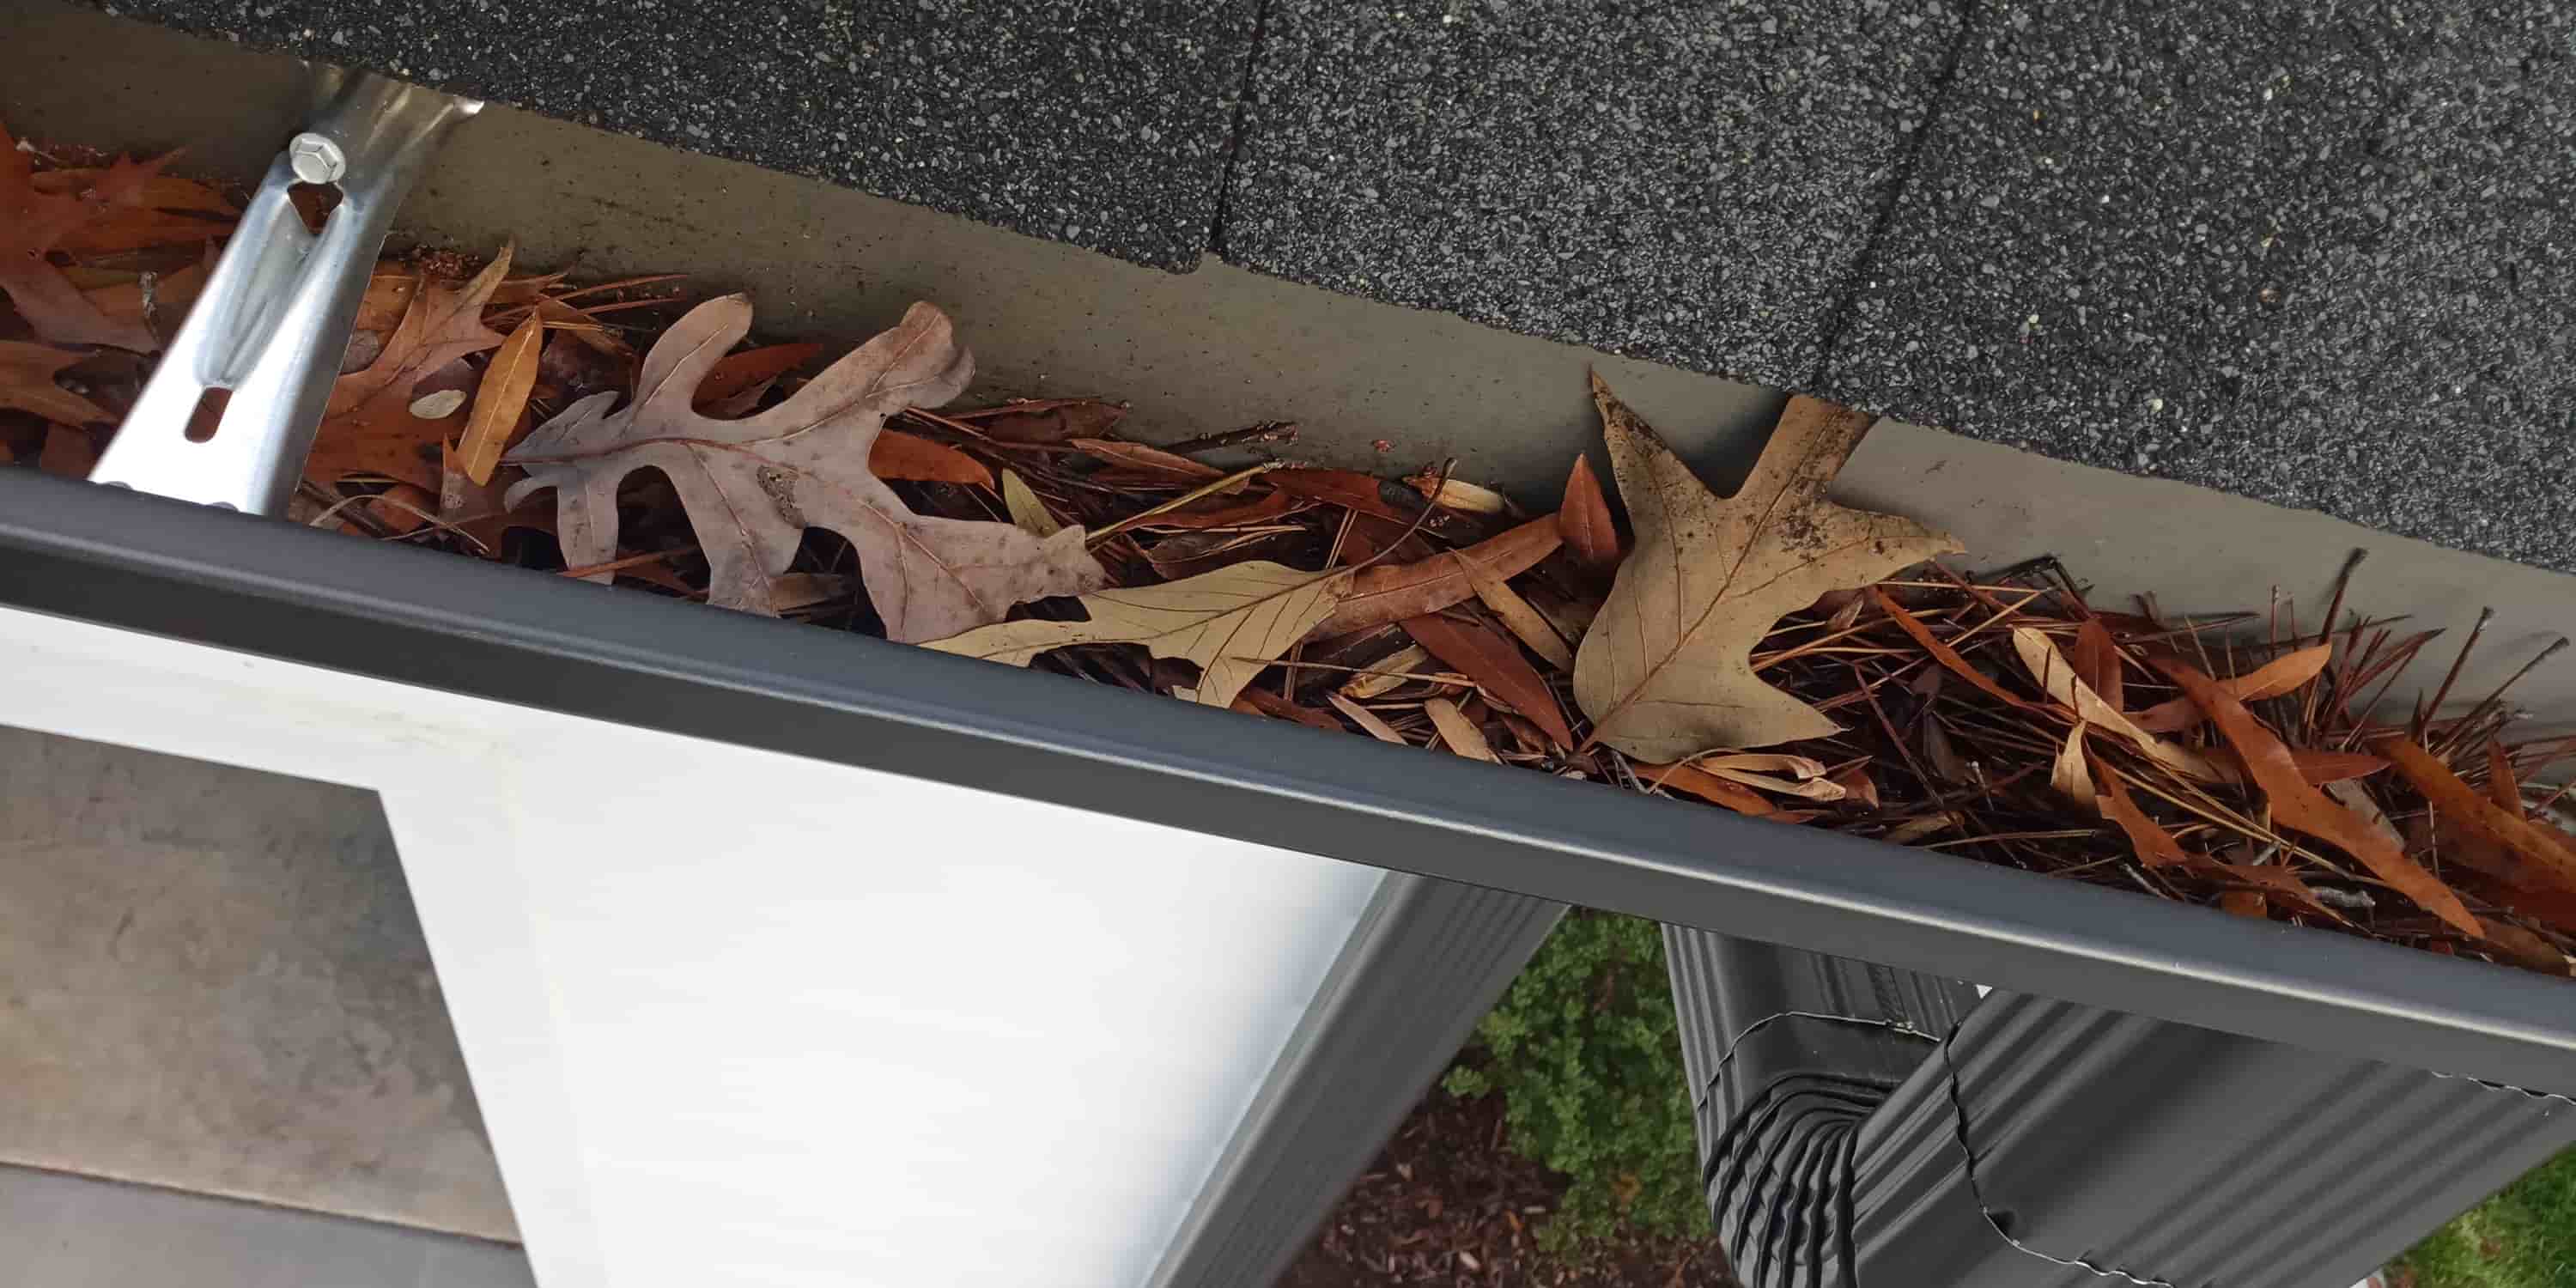 gutter cleaning companies near me